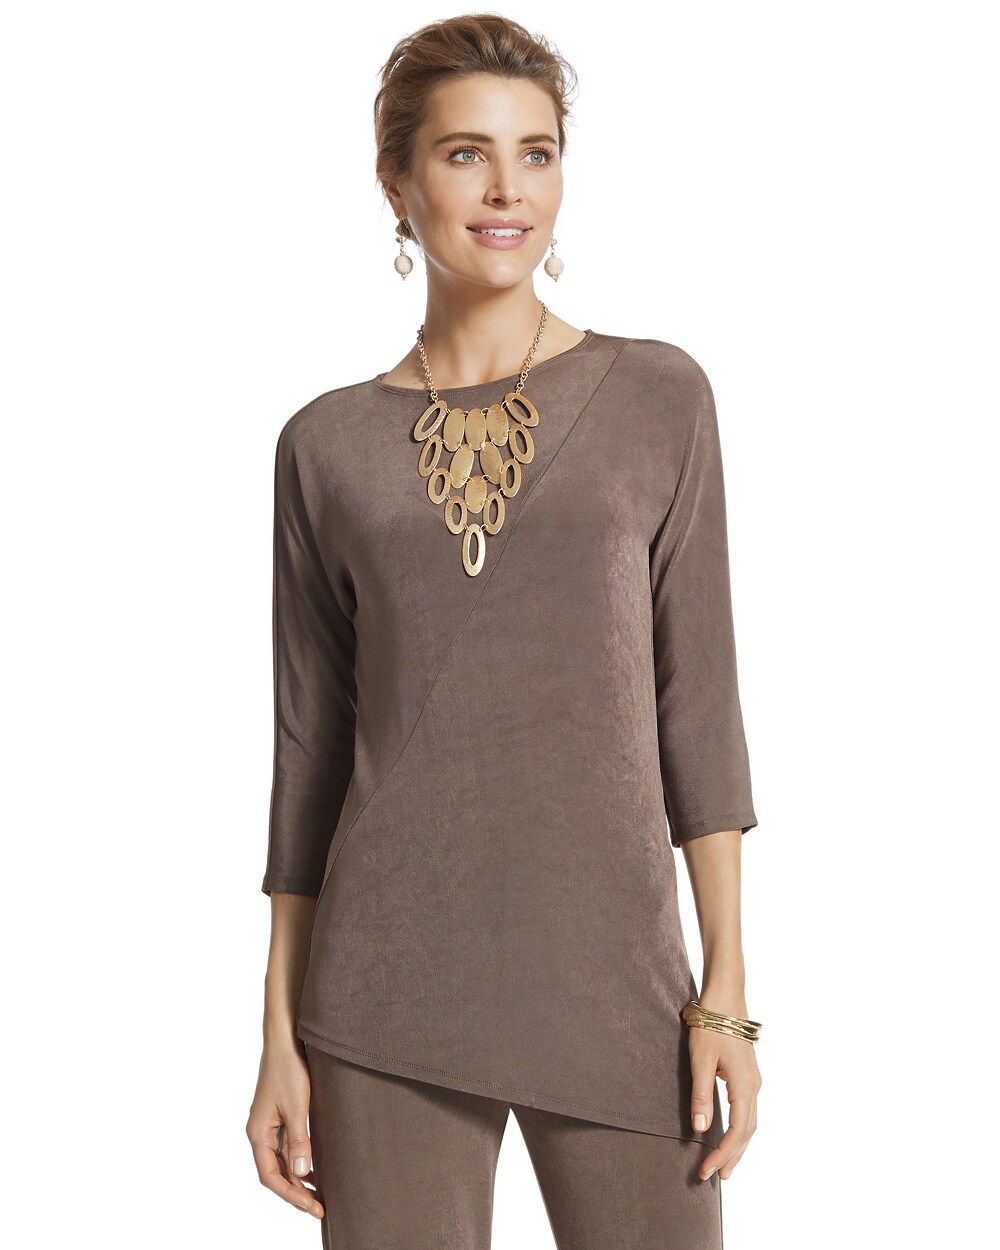 Travelers Classic Seamed Dolman Top